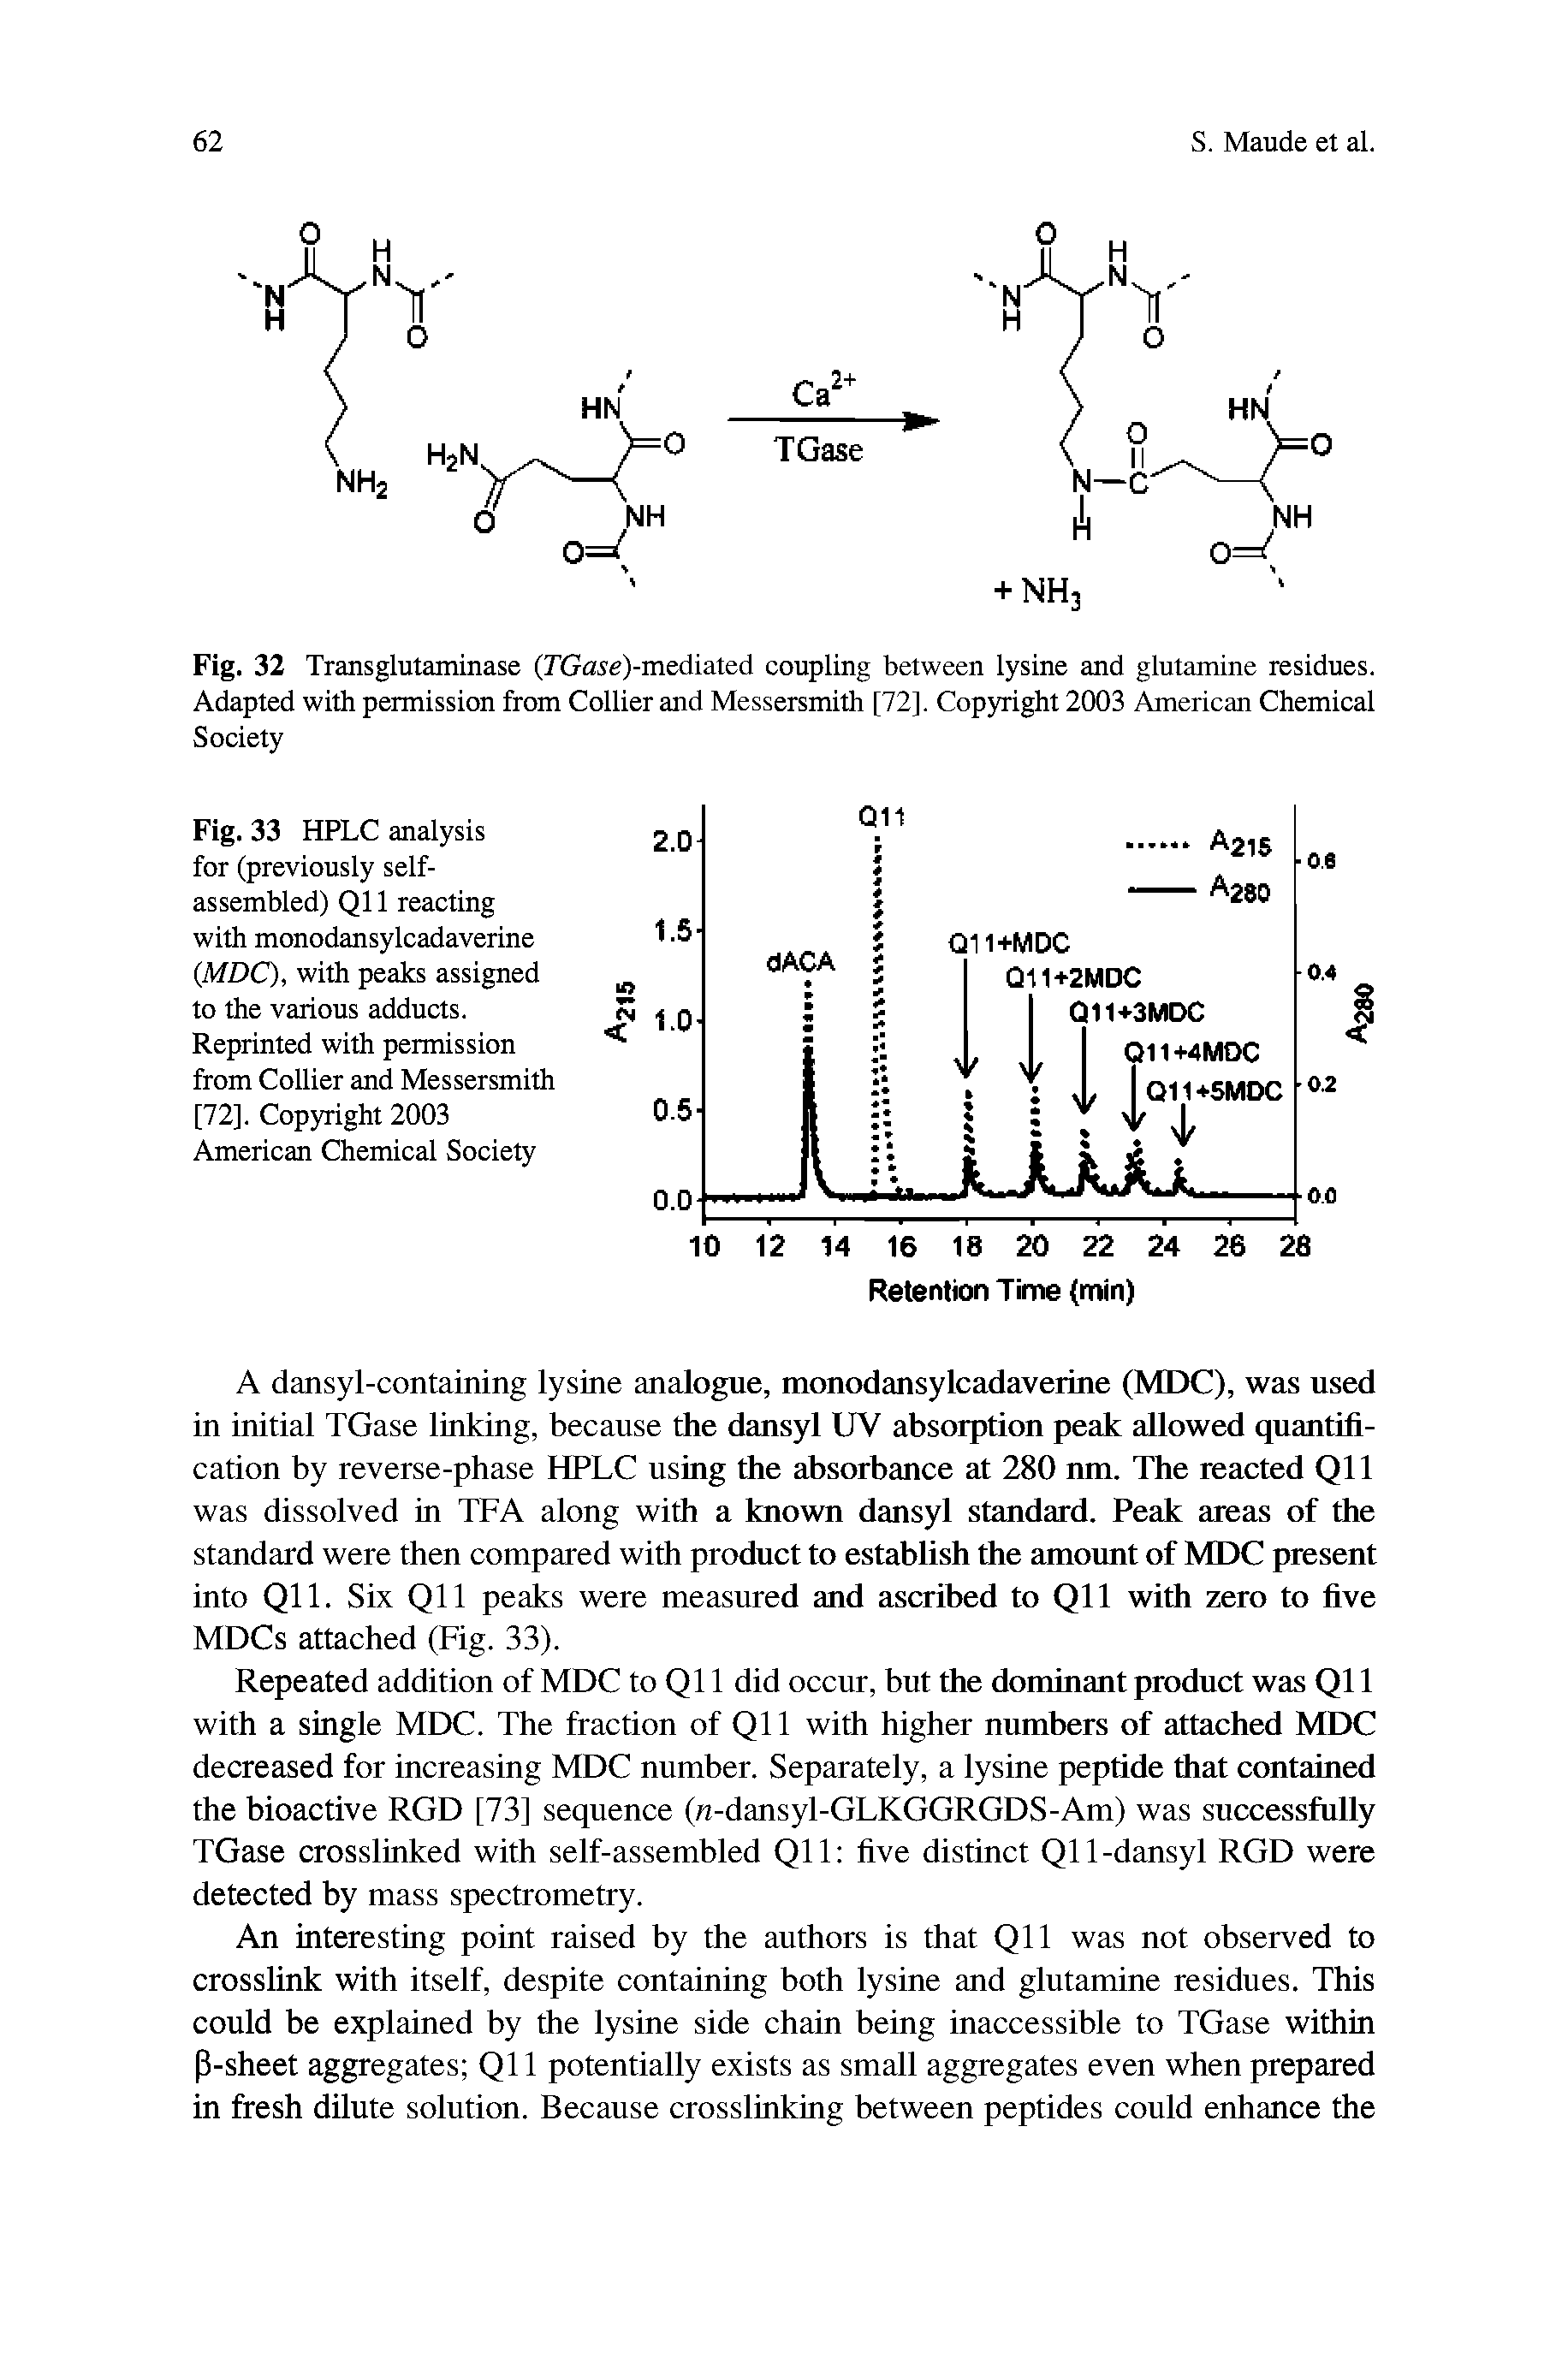 Fig. 33 HPLC analysis for (previously self-assembled) Q11 reacting with monodansylcadaverine (MDC), with peaks assigned to the various adducts. Reprinted with permission from Collier and Messersmith [72]. Copyright 2003 American Chemical Society...